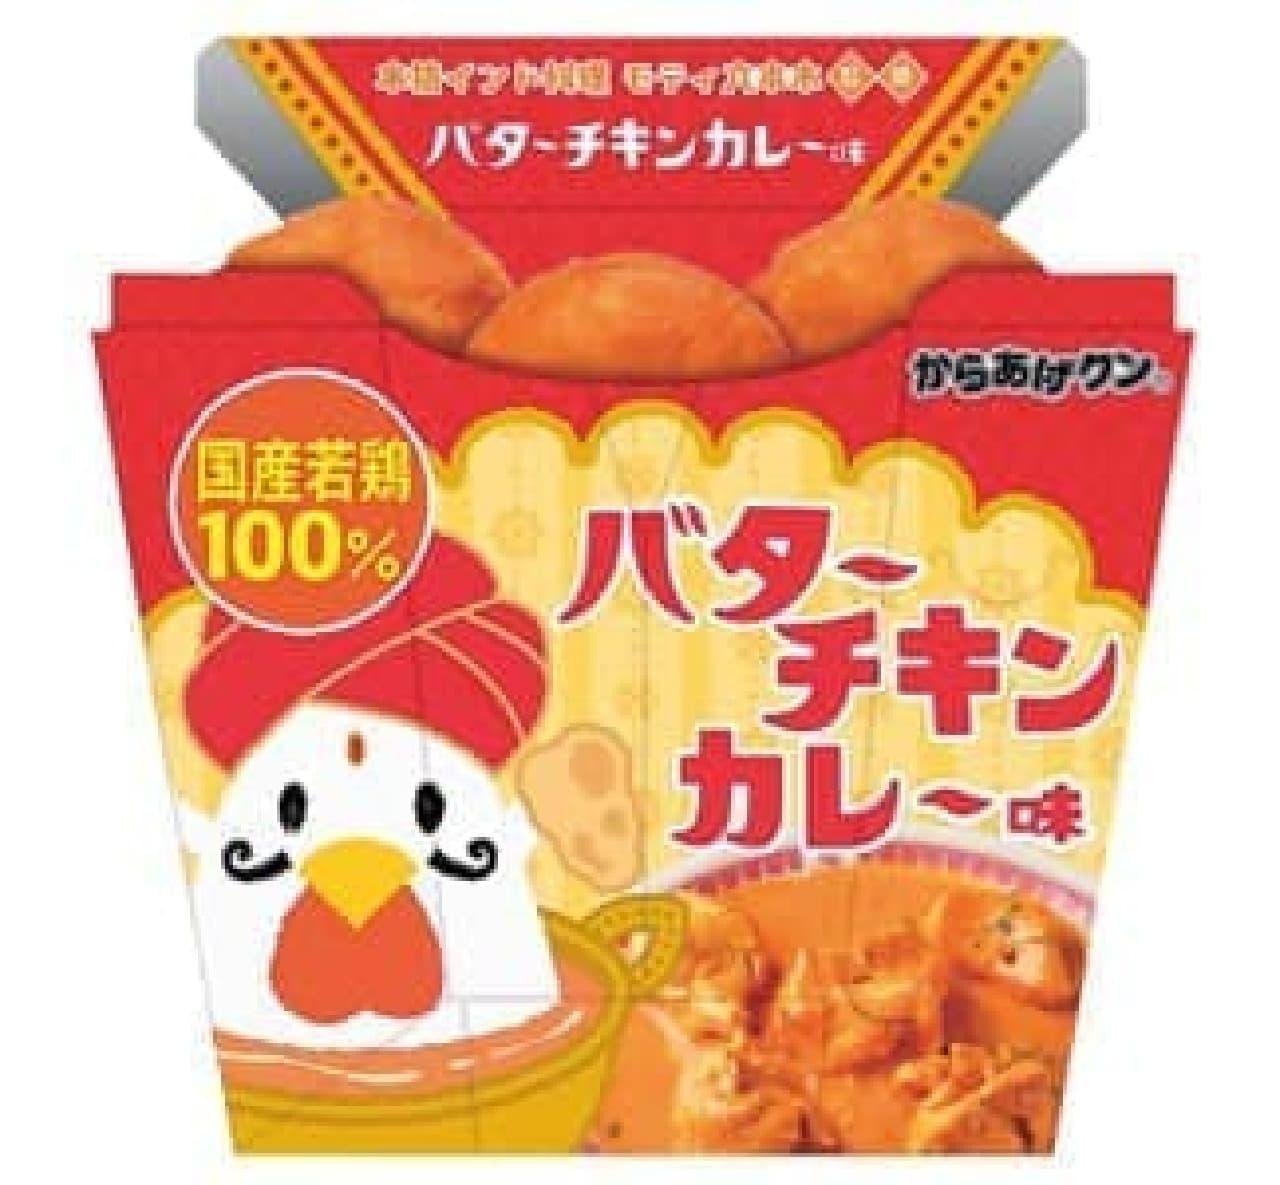 "Butter chicken curry flavor" for karaage cunnilingus!